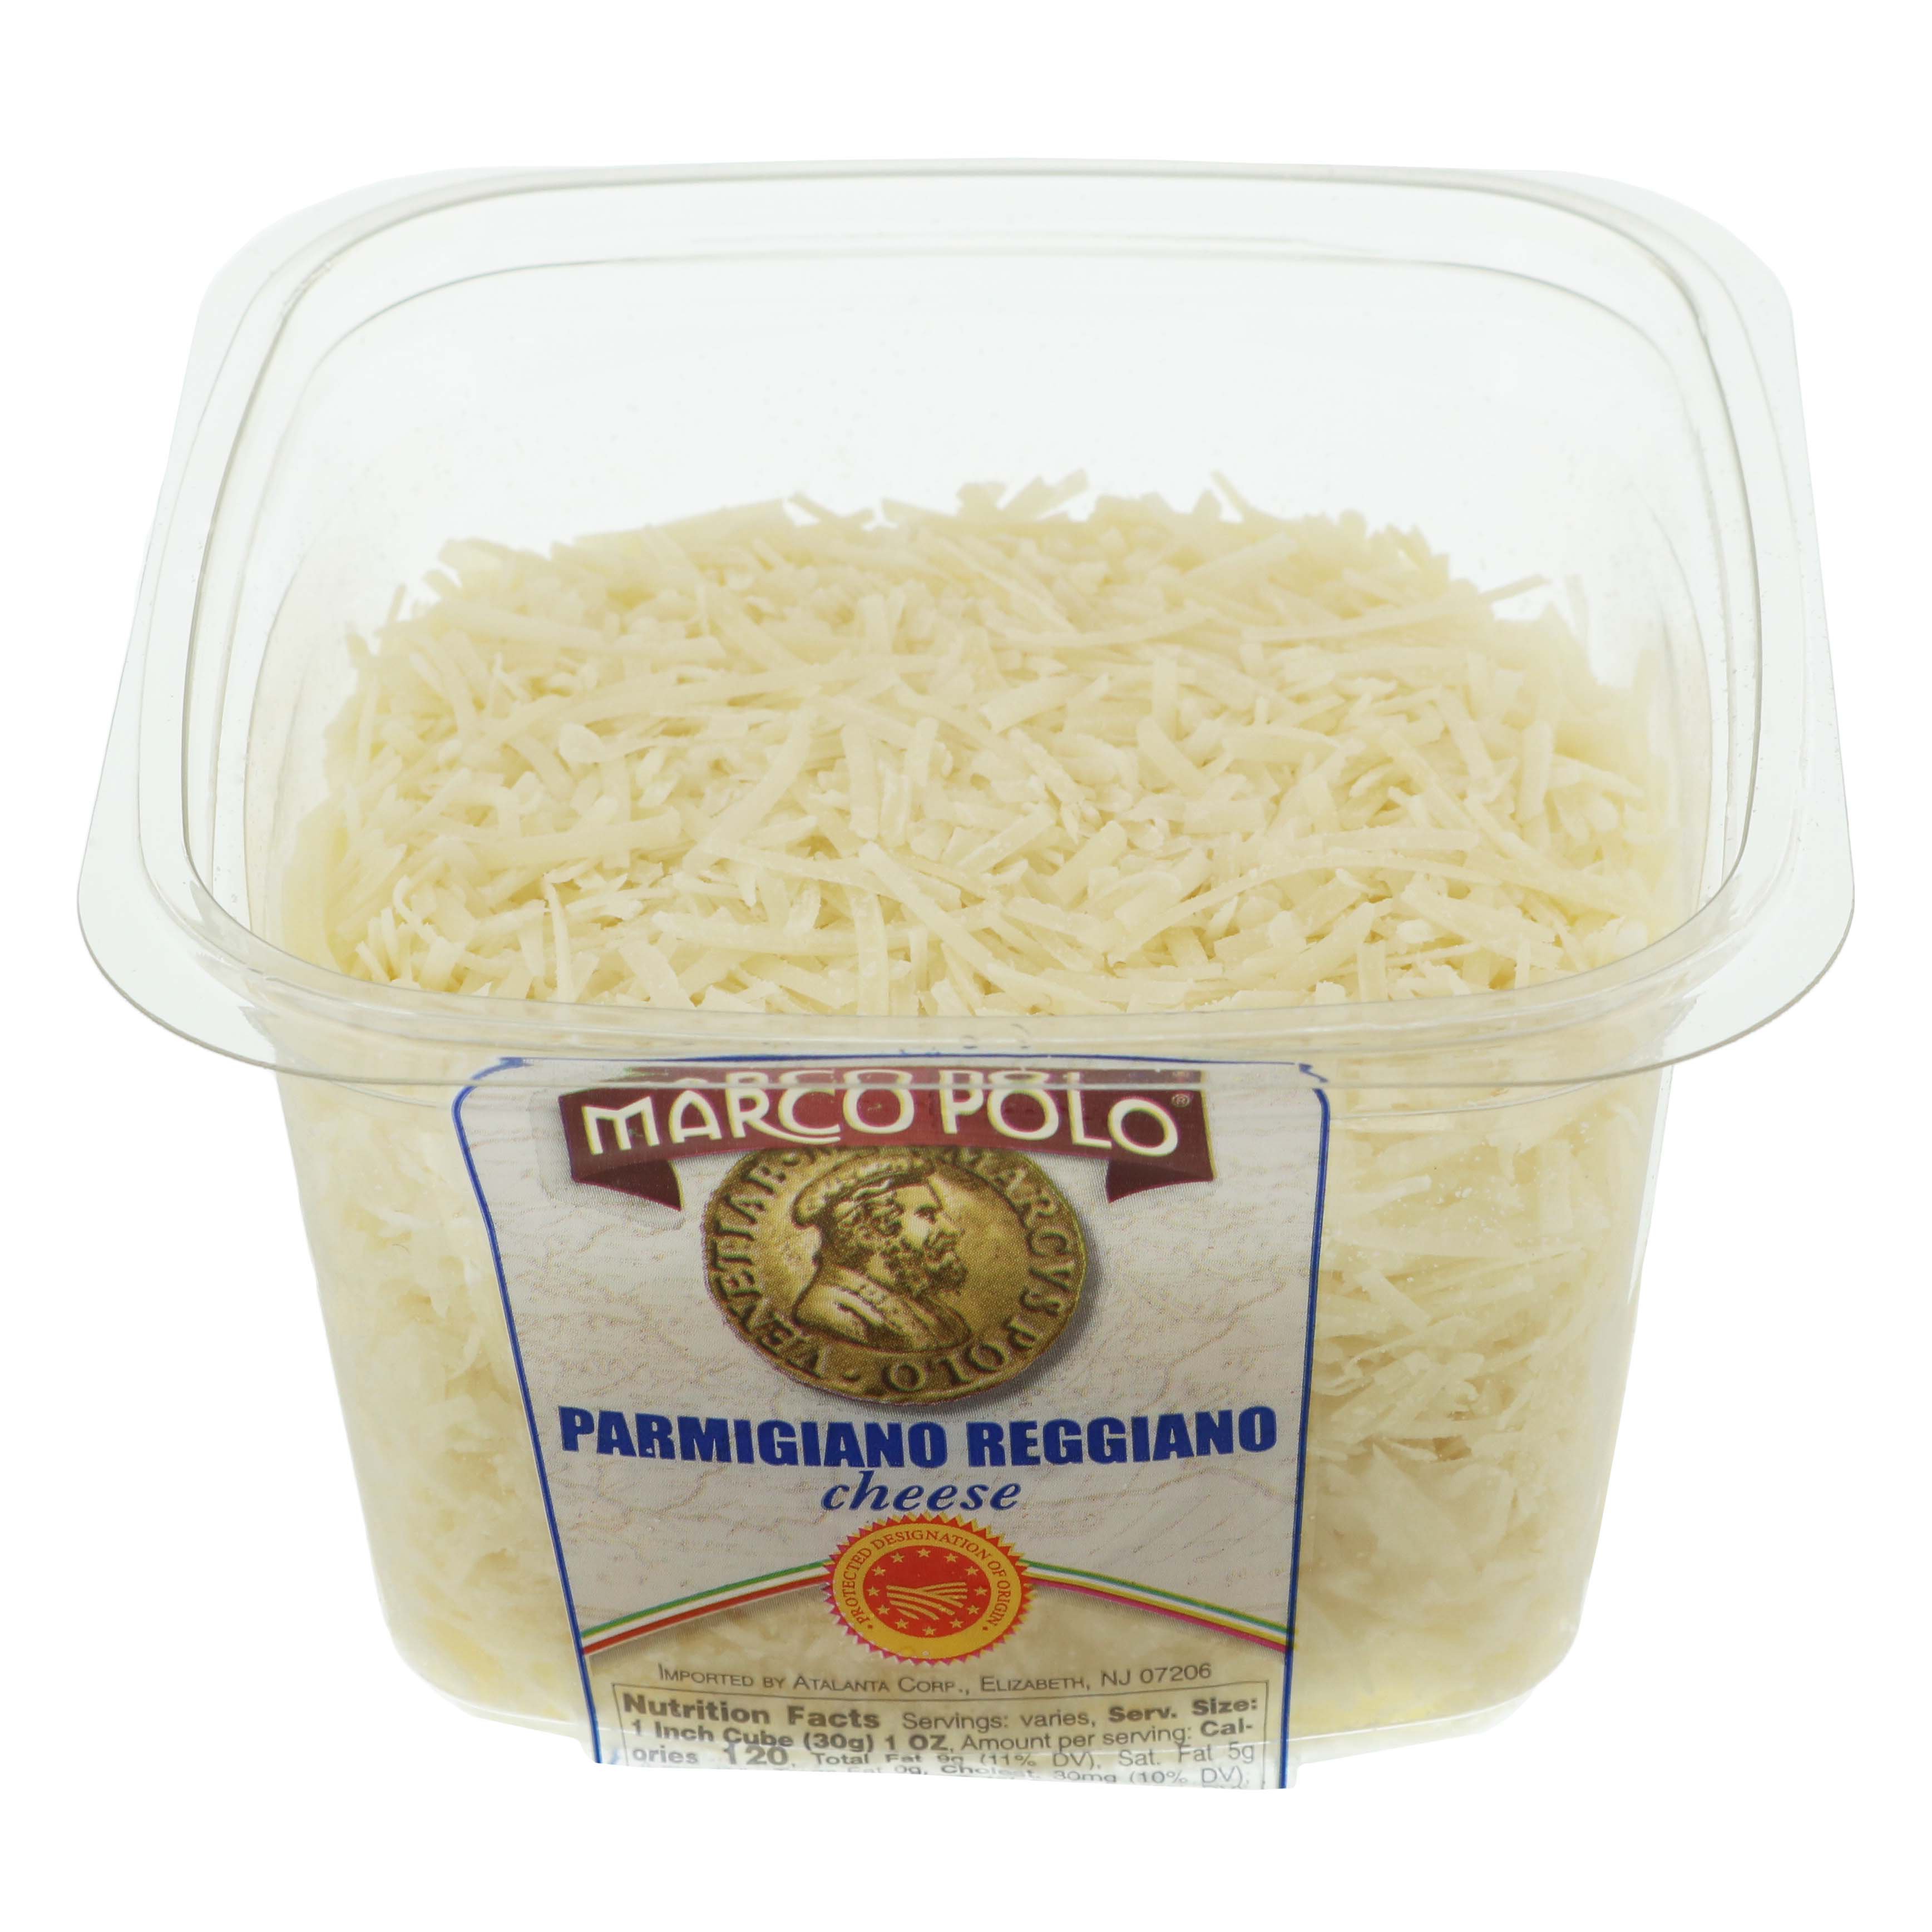 Marco Polo Parmigiano Reggiano Shredded Shop Cheese At H E B,Gender Neutral Colors For Baby Clothes